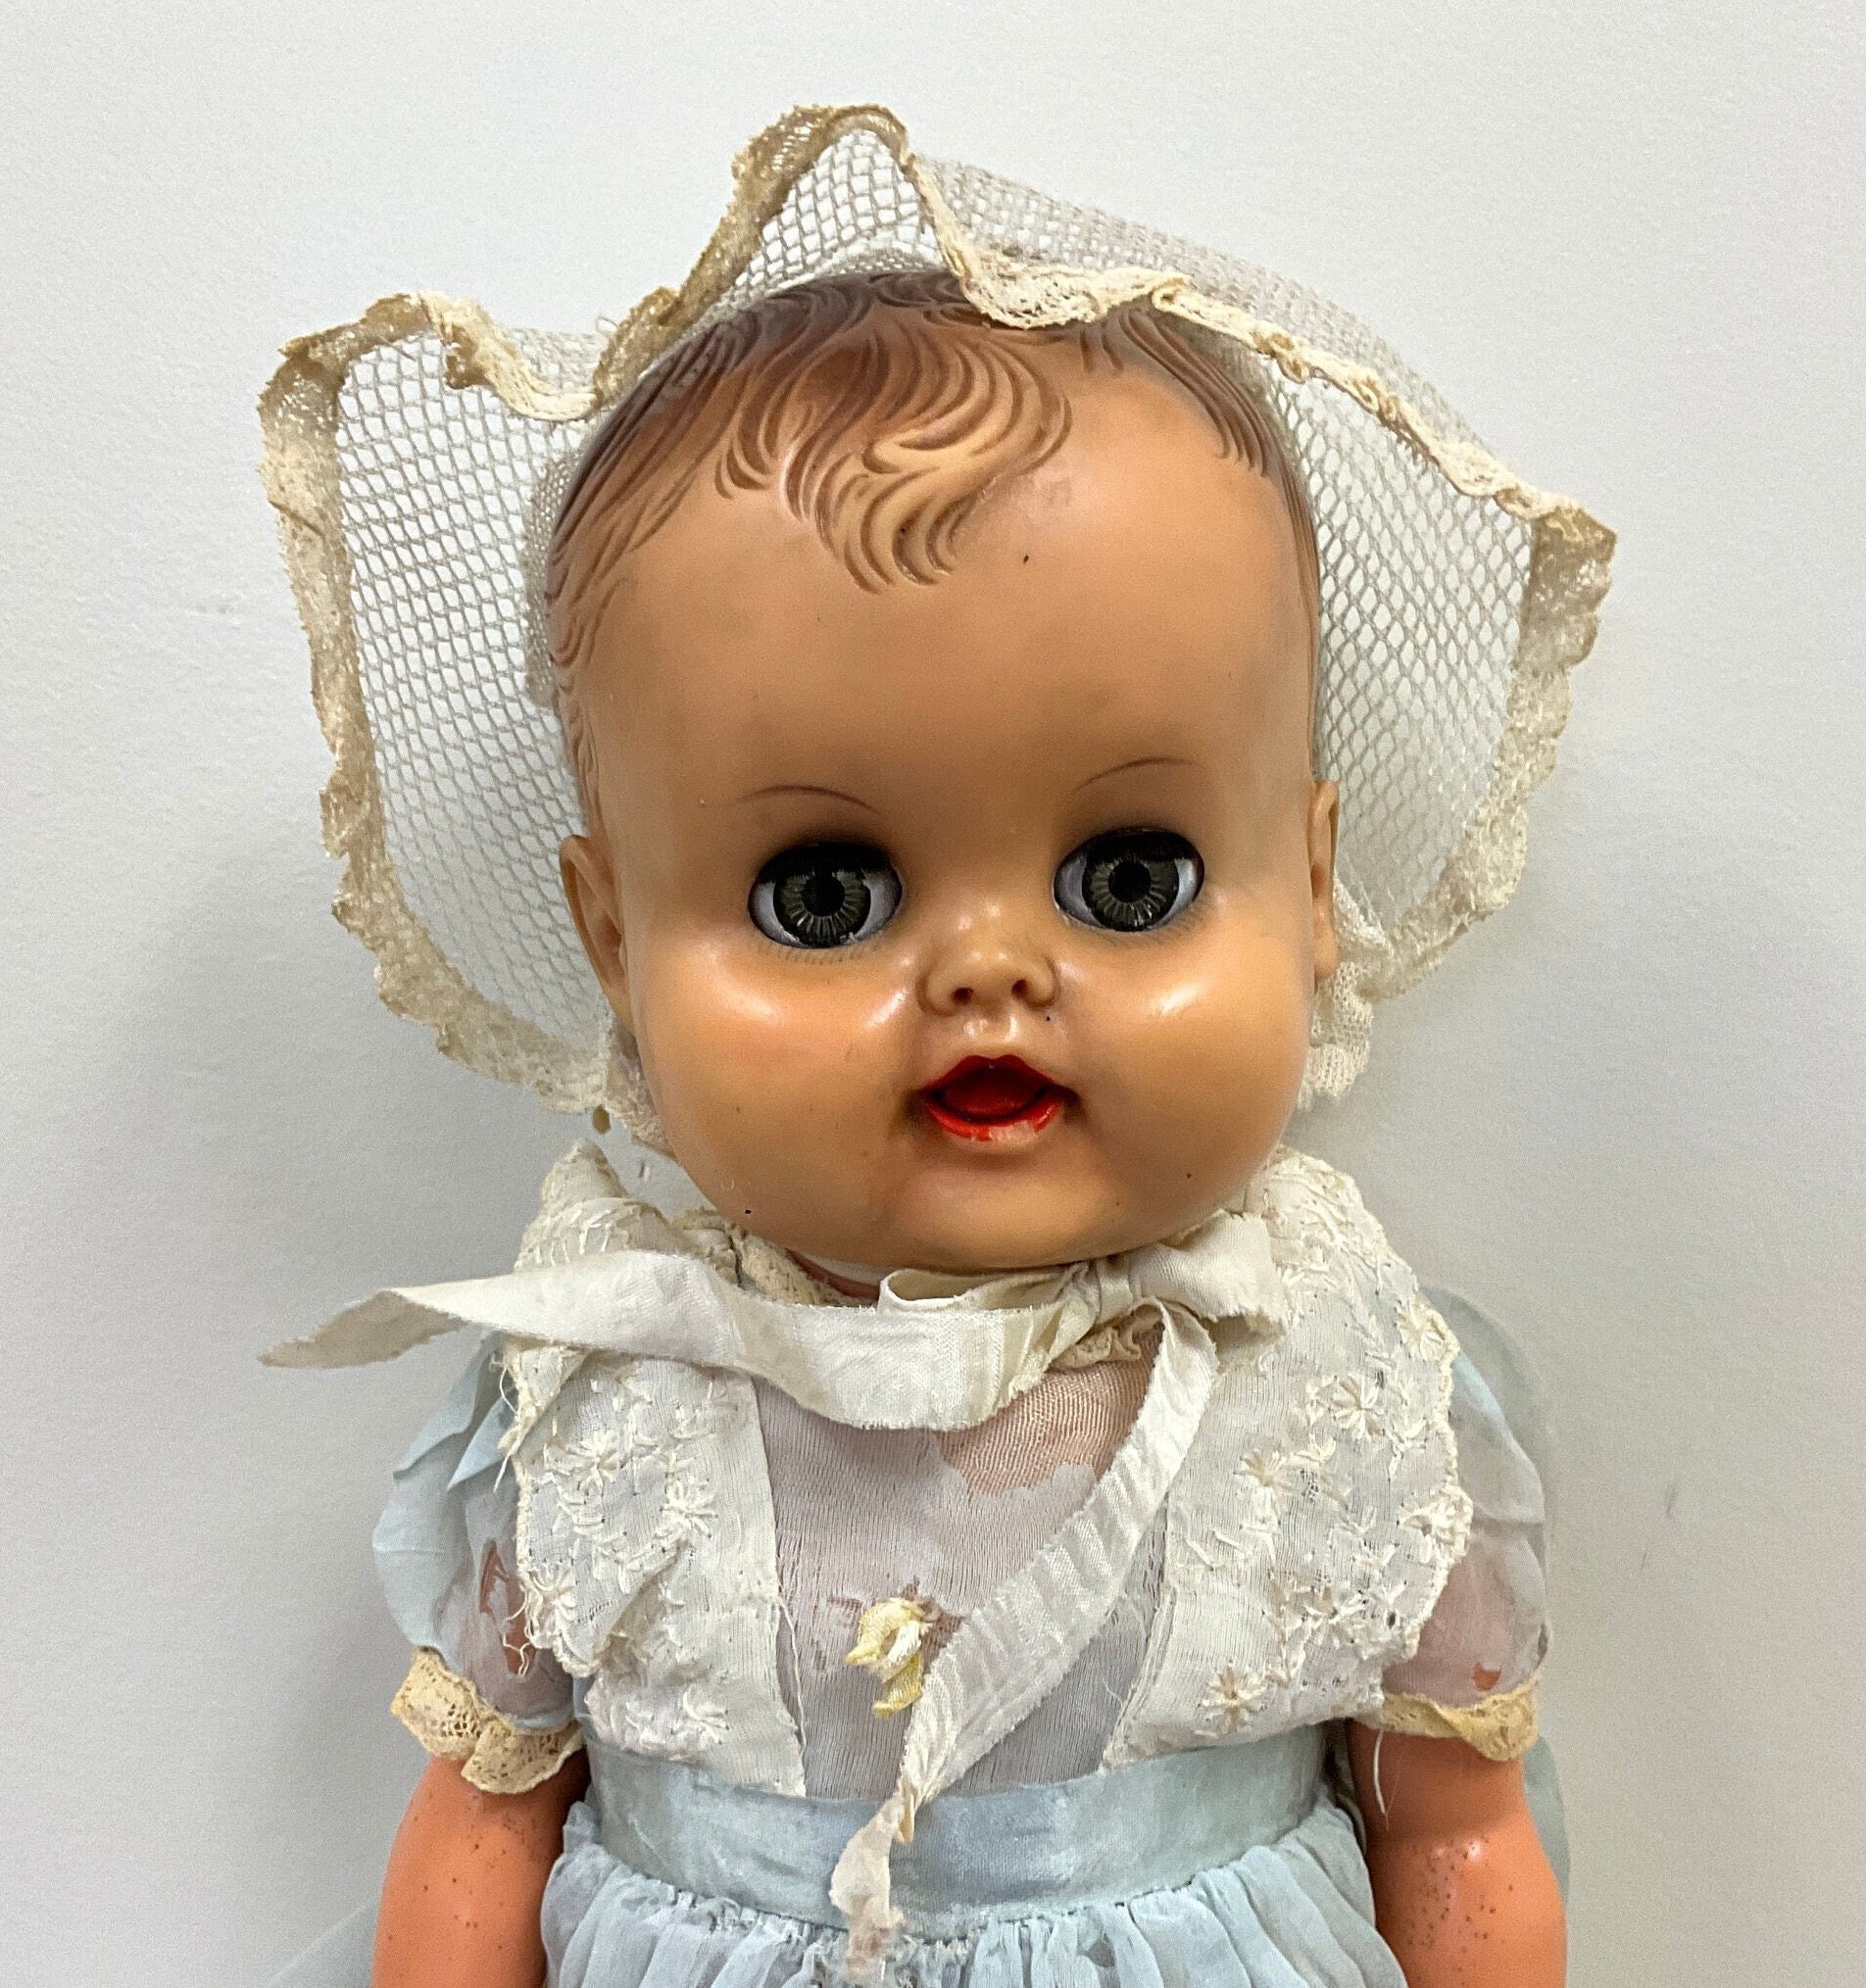 Small Vintage Soft Plastic/rubber Kleeware Sitting Baby Doll 1950s